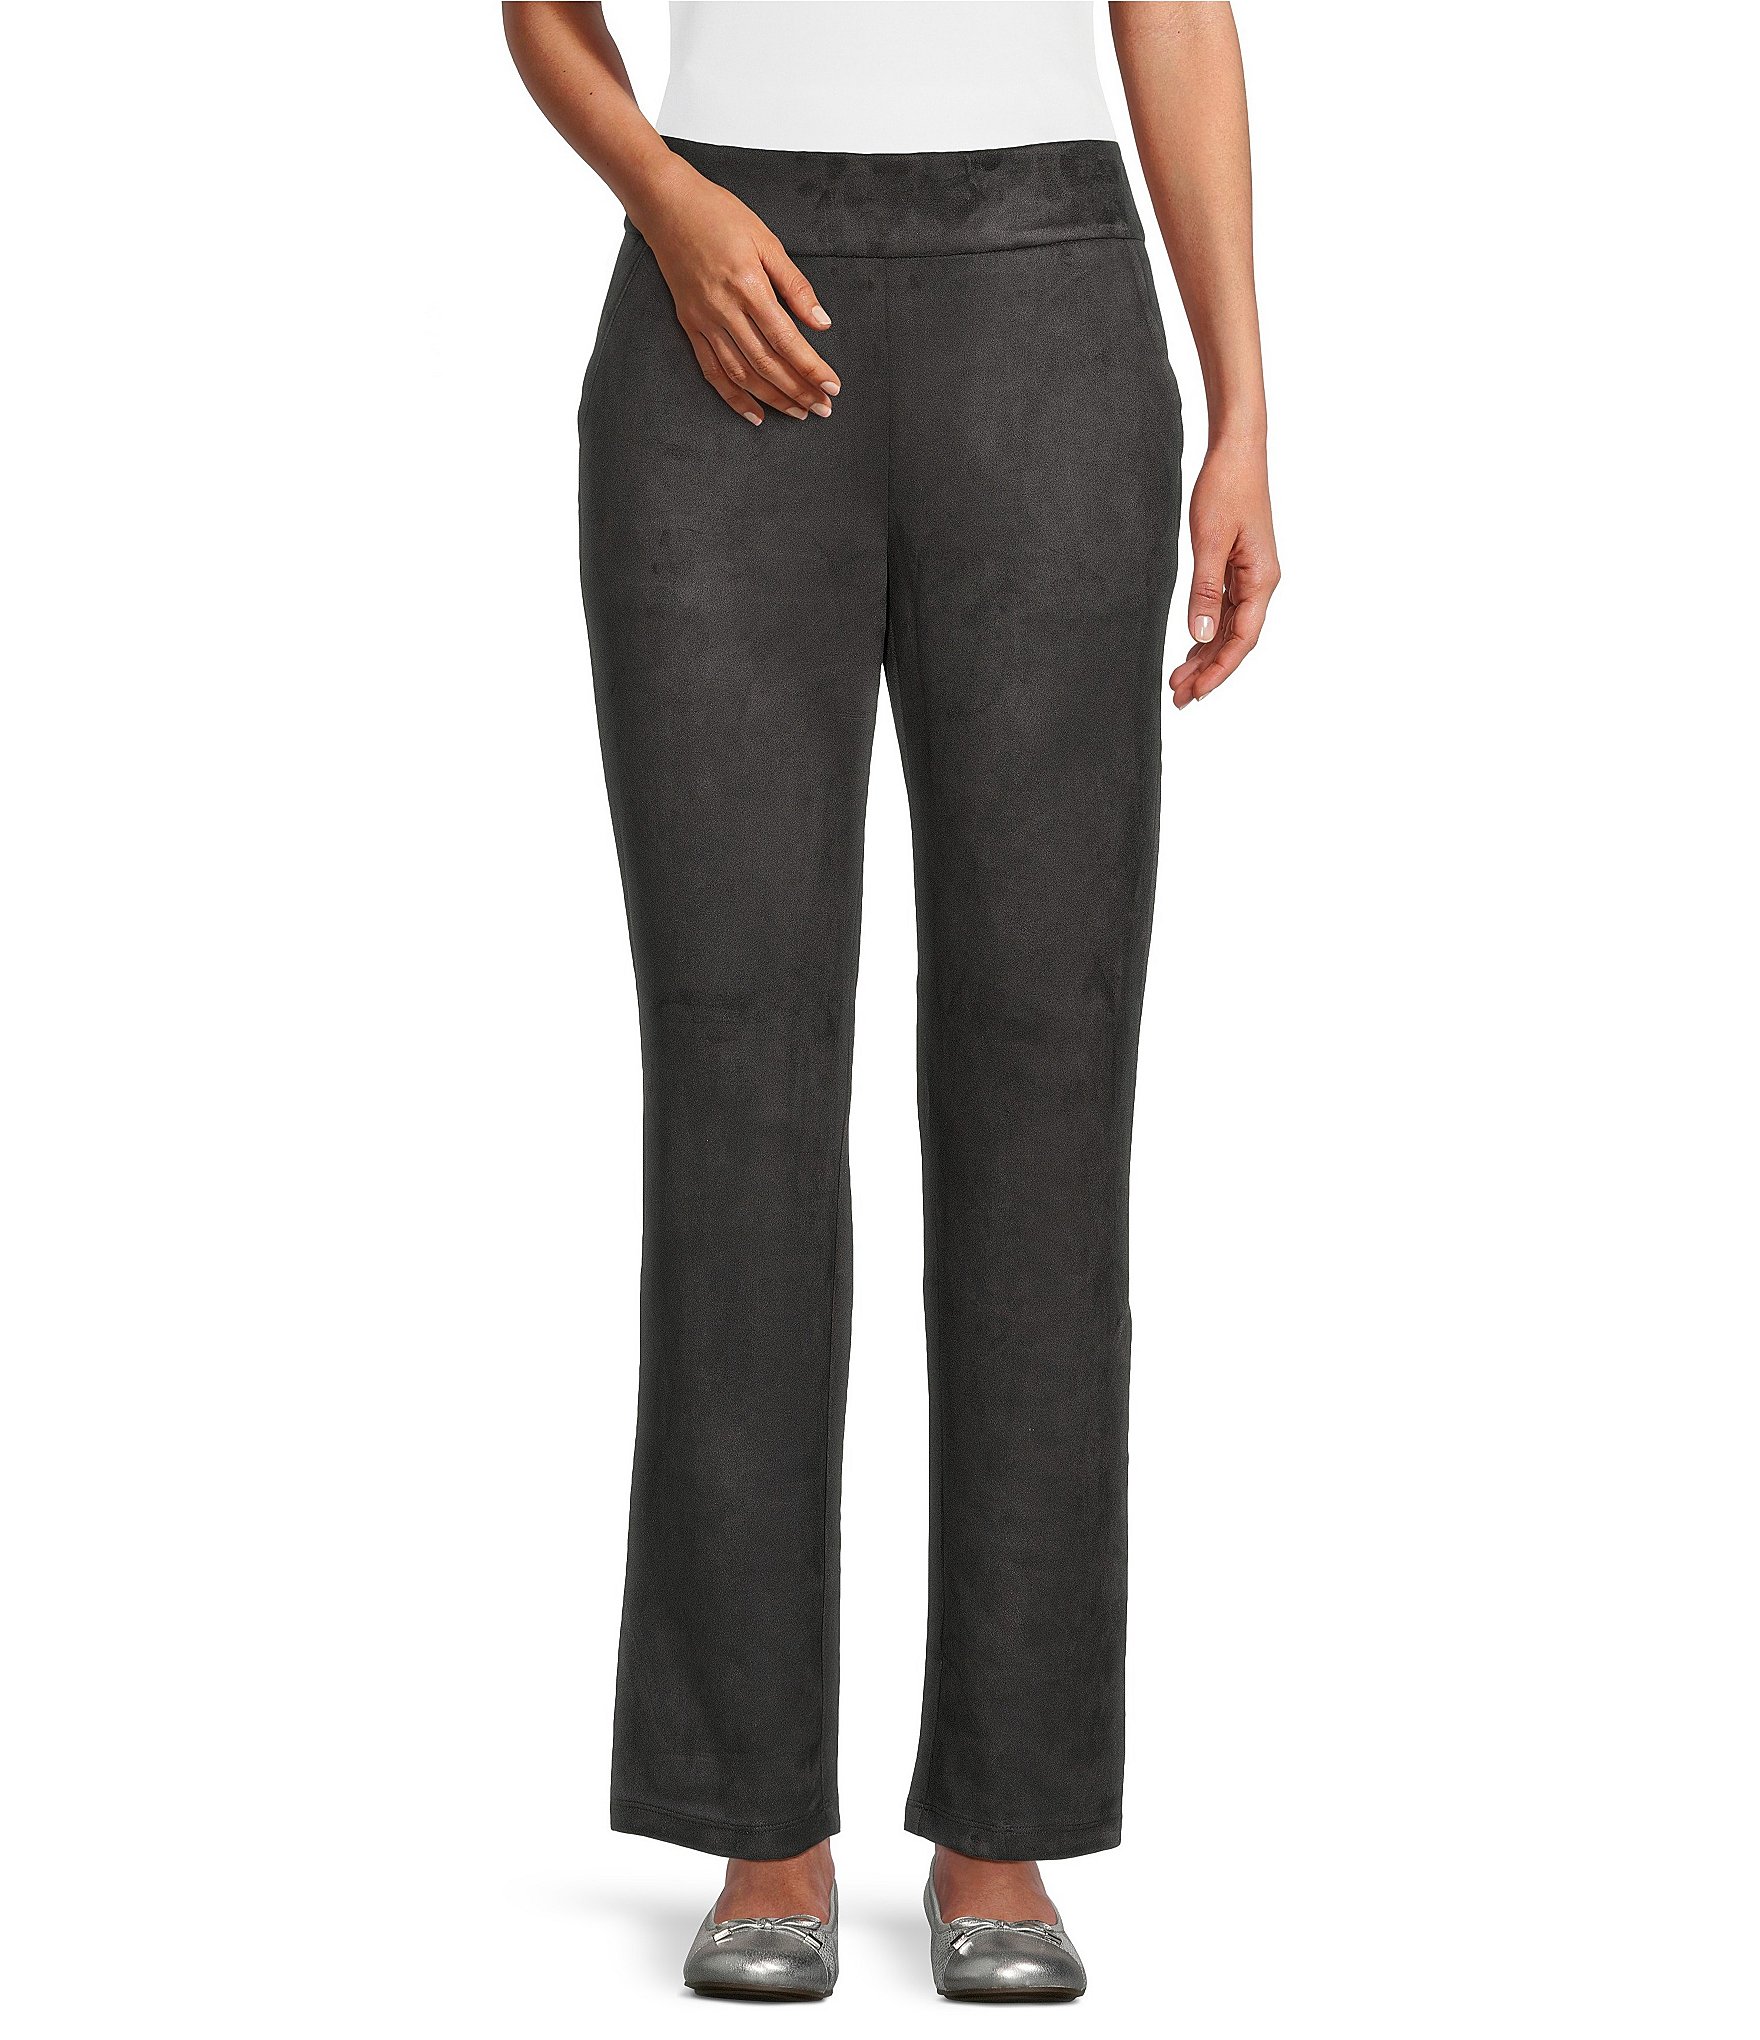 Allison Daley Luxe Suede Straight Leg Pull-On Pants | Dillard's